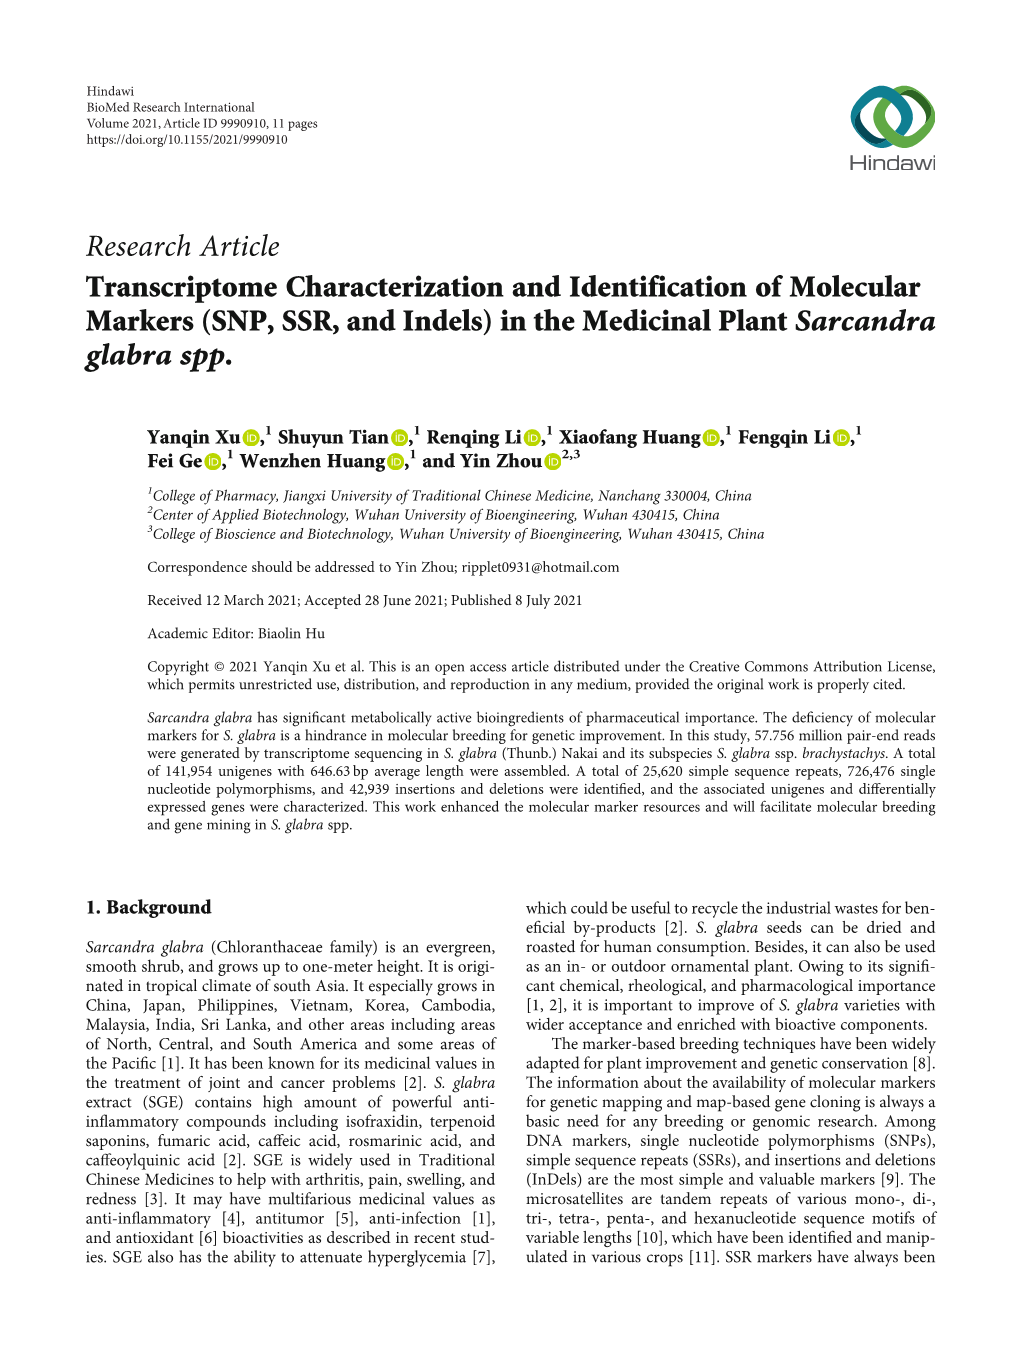 Transcriptome Characterization and Identification of Molecular Markers (SNP, SSR, and Indels) in the Medicinal Plant Sarcandra Glabra Spp